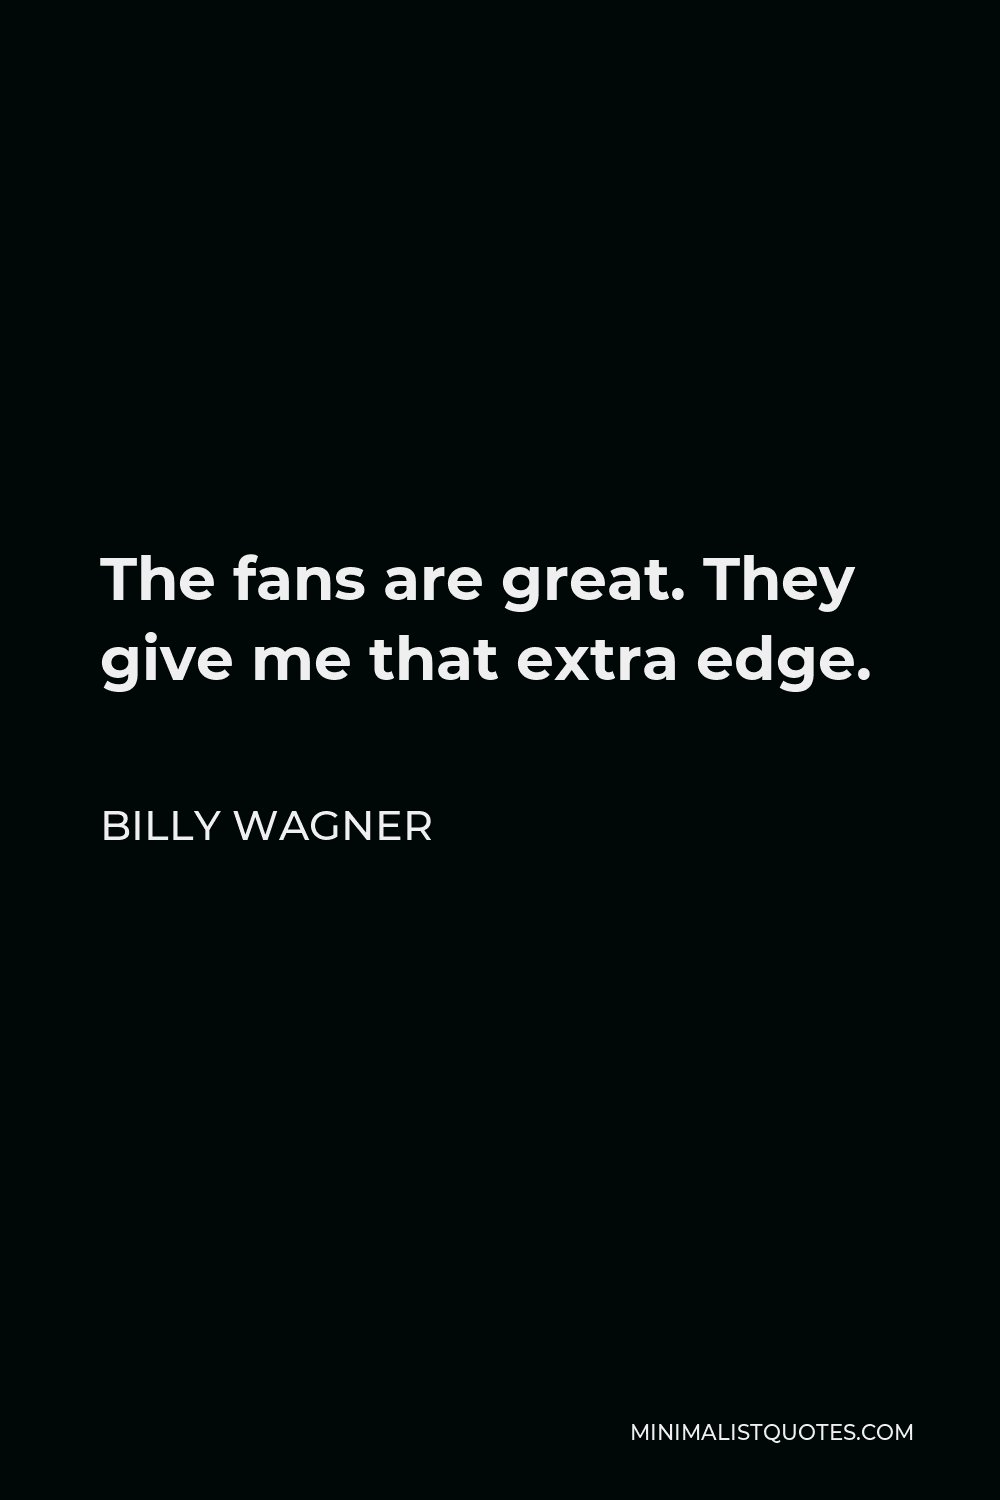 Billy Wagner Quote - The fans are great. They give me that extra edge.